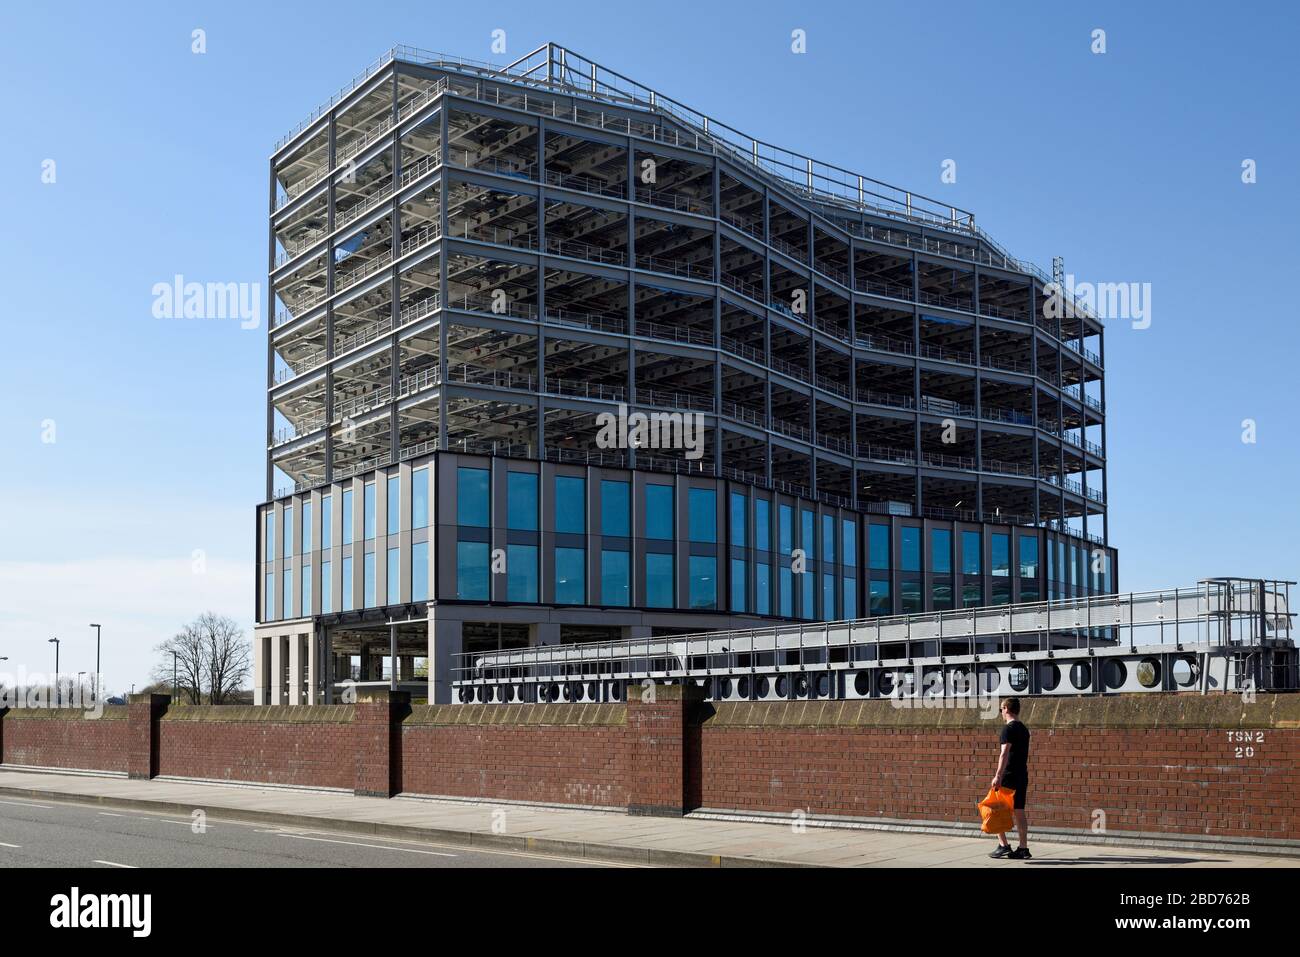 Nottingham, UK. April 7th 2020. Uk Coronavirus Lockdown Day 14. Nottingham city continues with social distancing and Lockdown of non-essential travel. Stock Photo